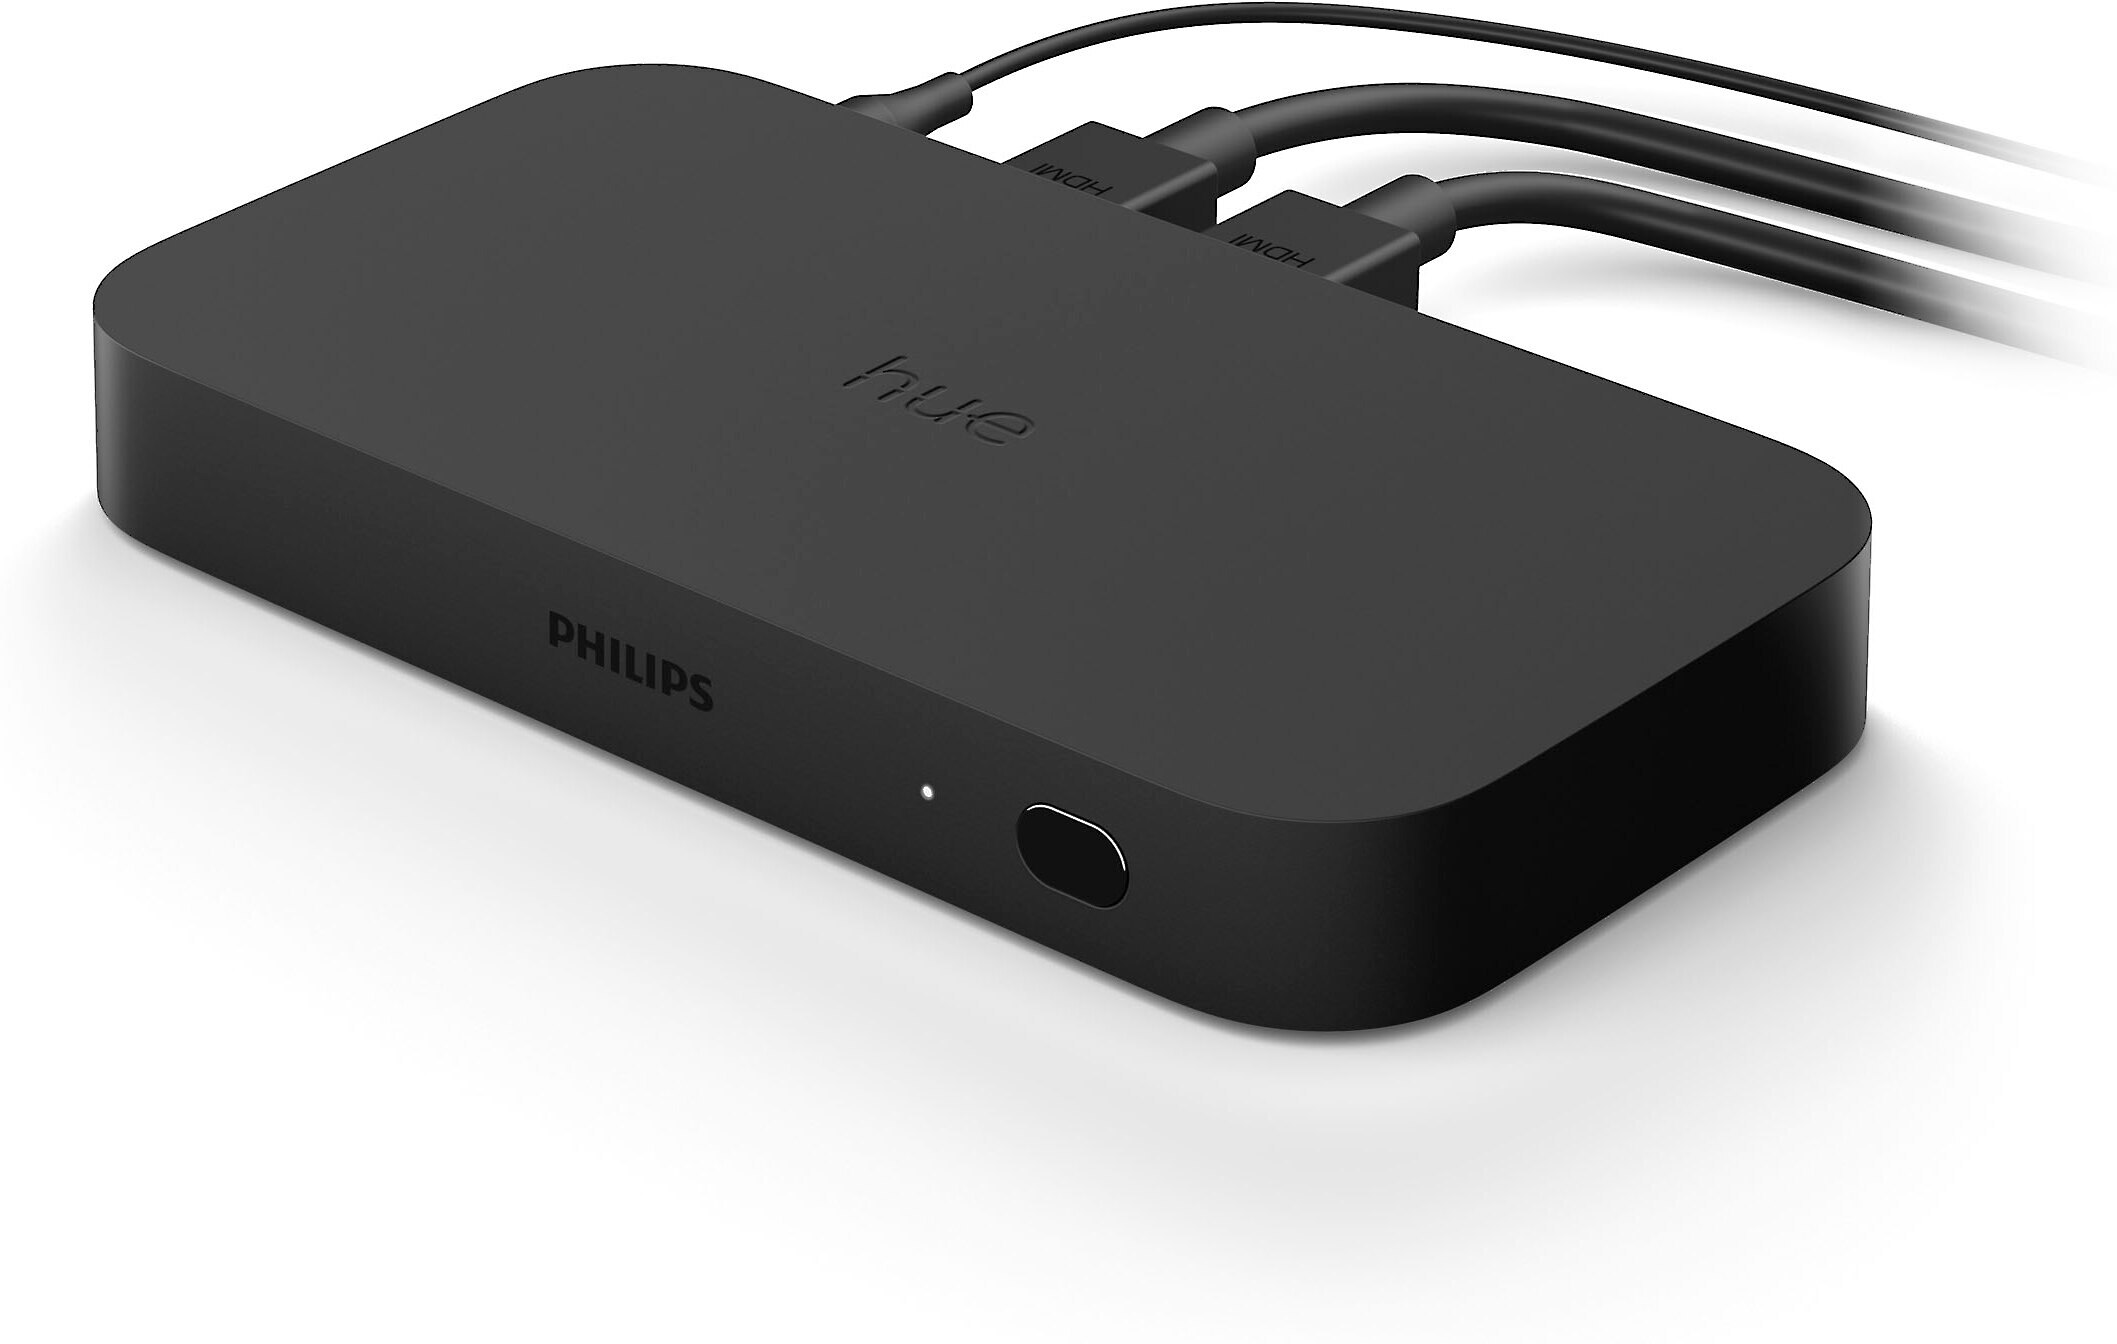 Philips Hue HDMI Sync Box - next level home theatre? (review)